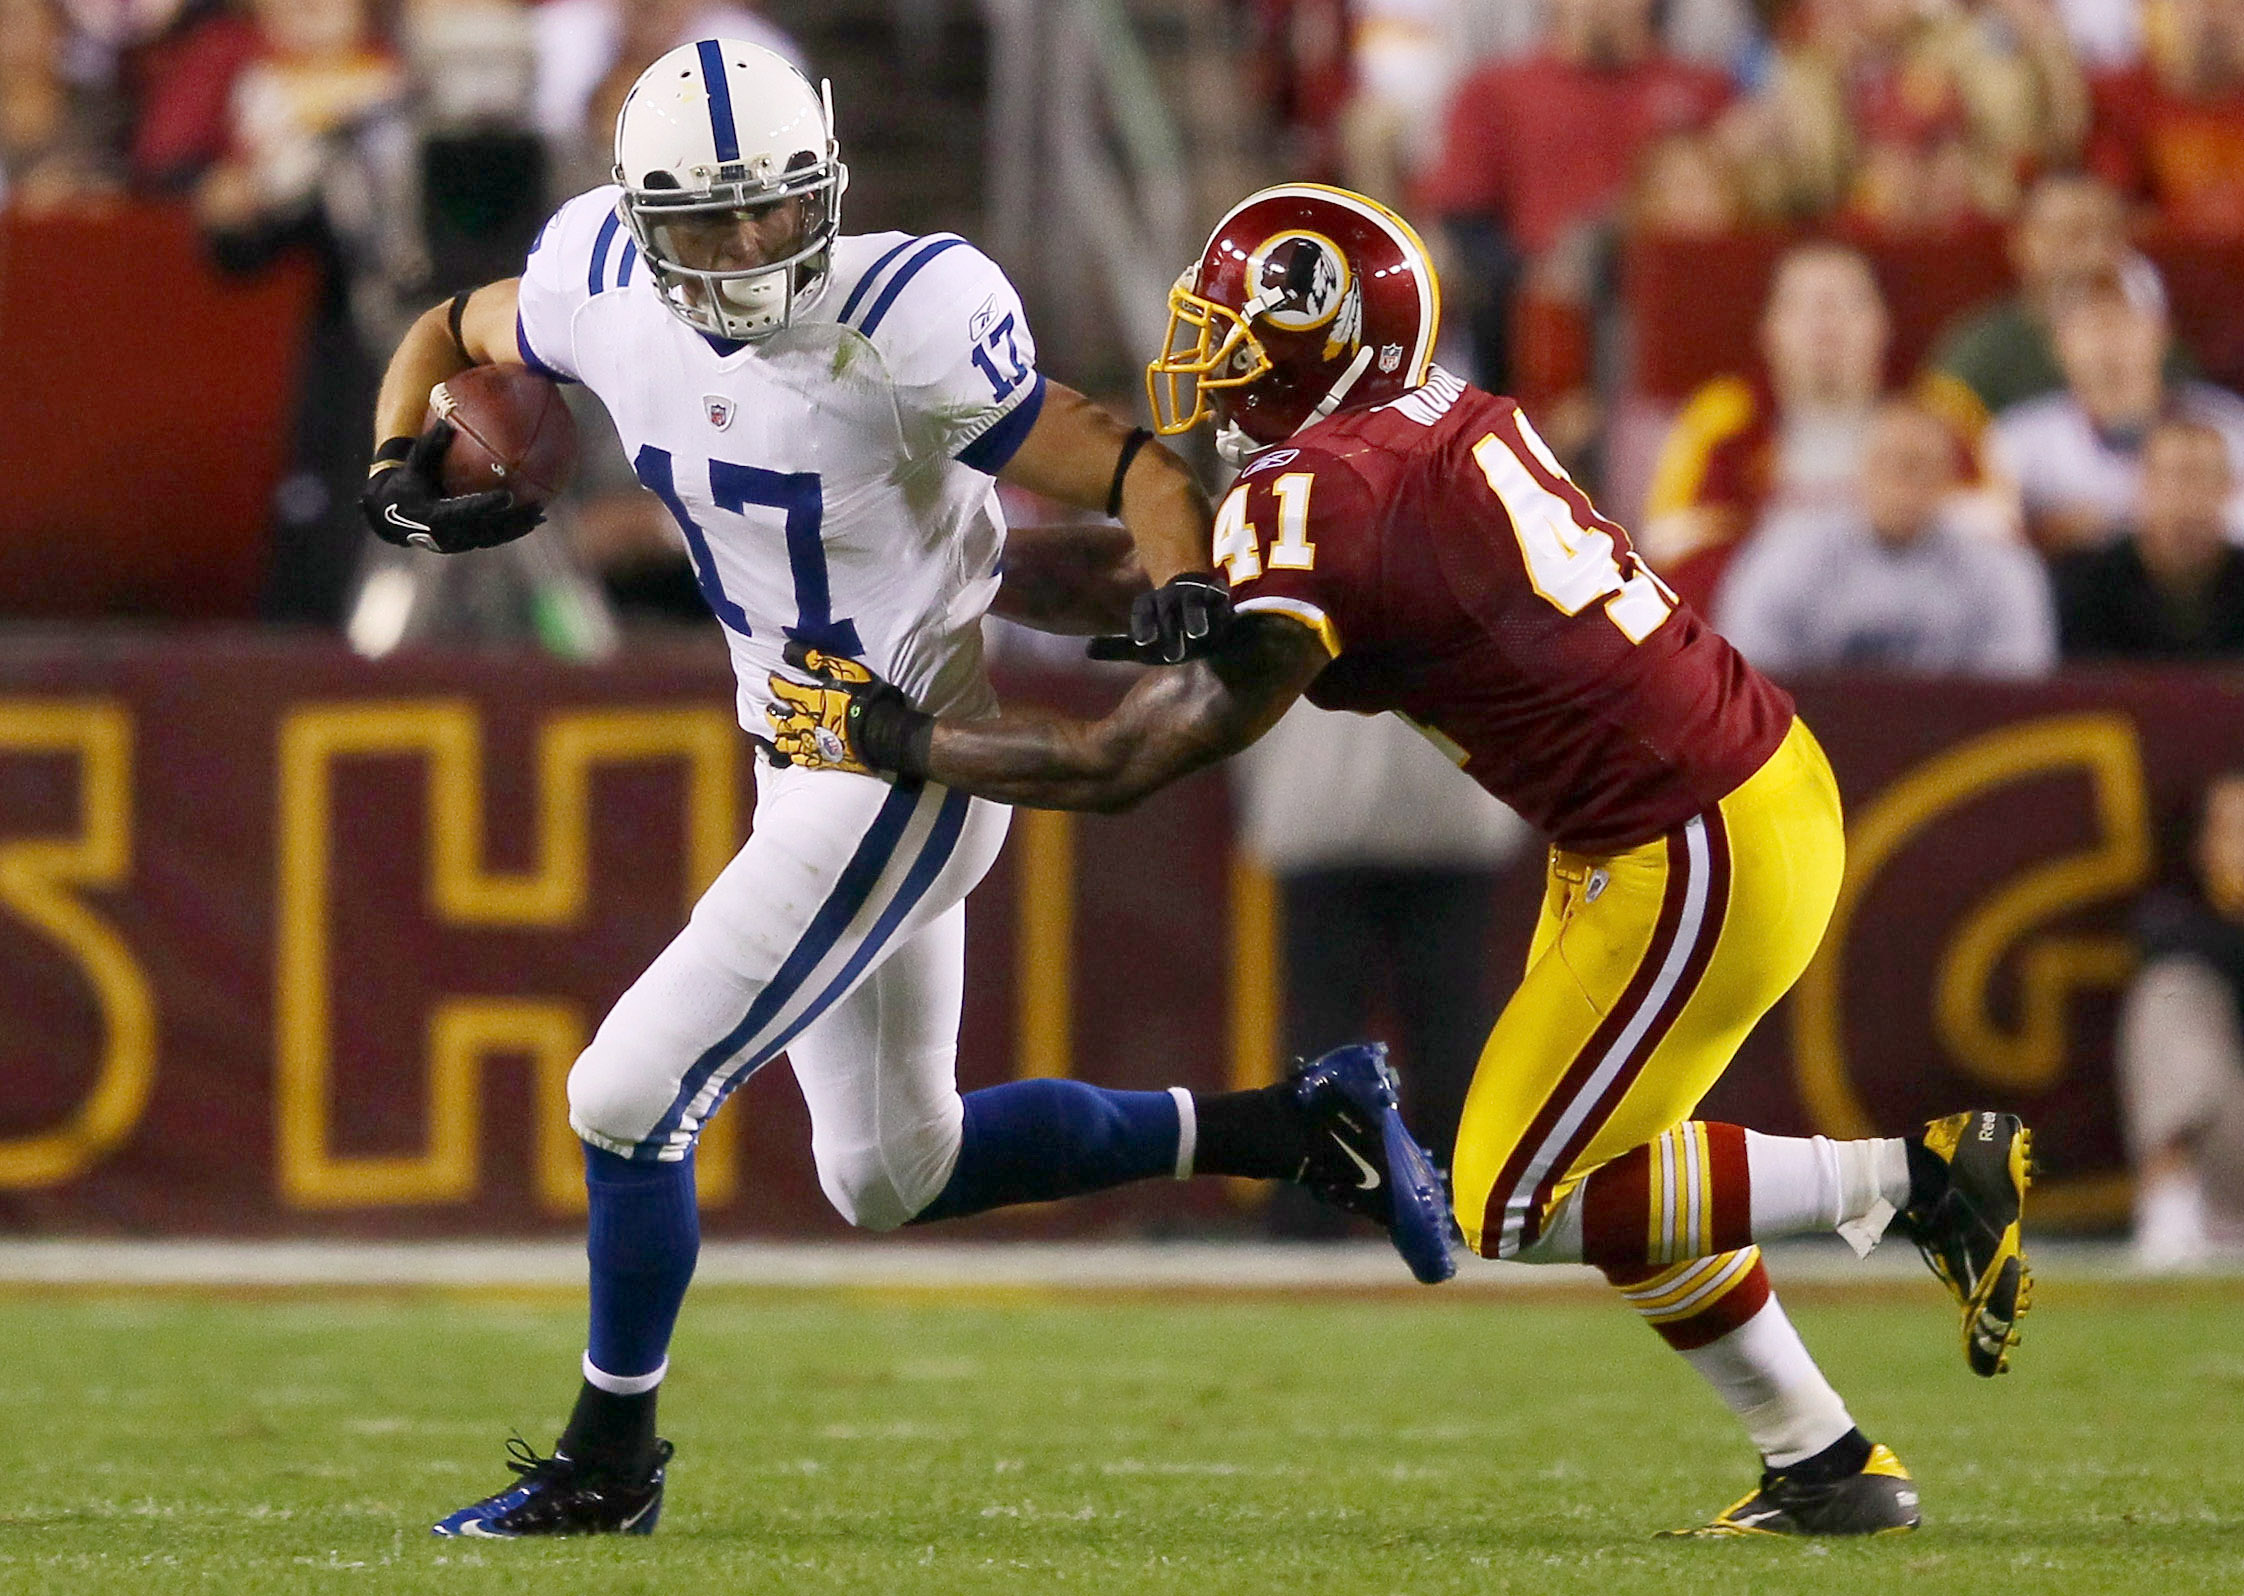 LANDOVER, MD - OCTOBER 17: Austin Collie #17 of the Indianapolis Colts moves the ball upfield after making a reception against Kareem Moore #41 of the Washington Redskins at FedExField on October 17, 2010 in Landover, Maryland.  (Photo by Win McNamee/Gett